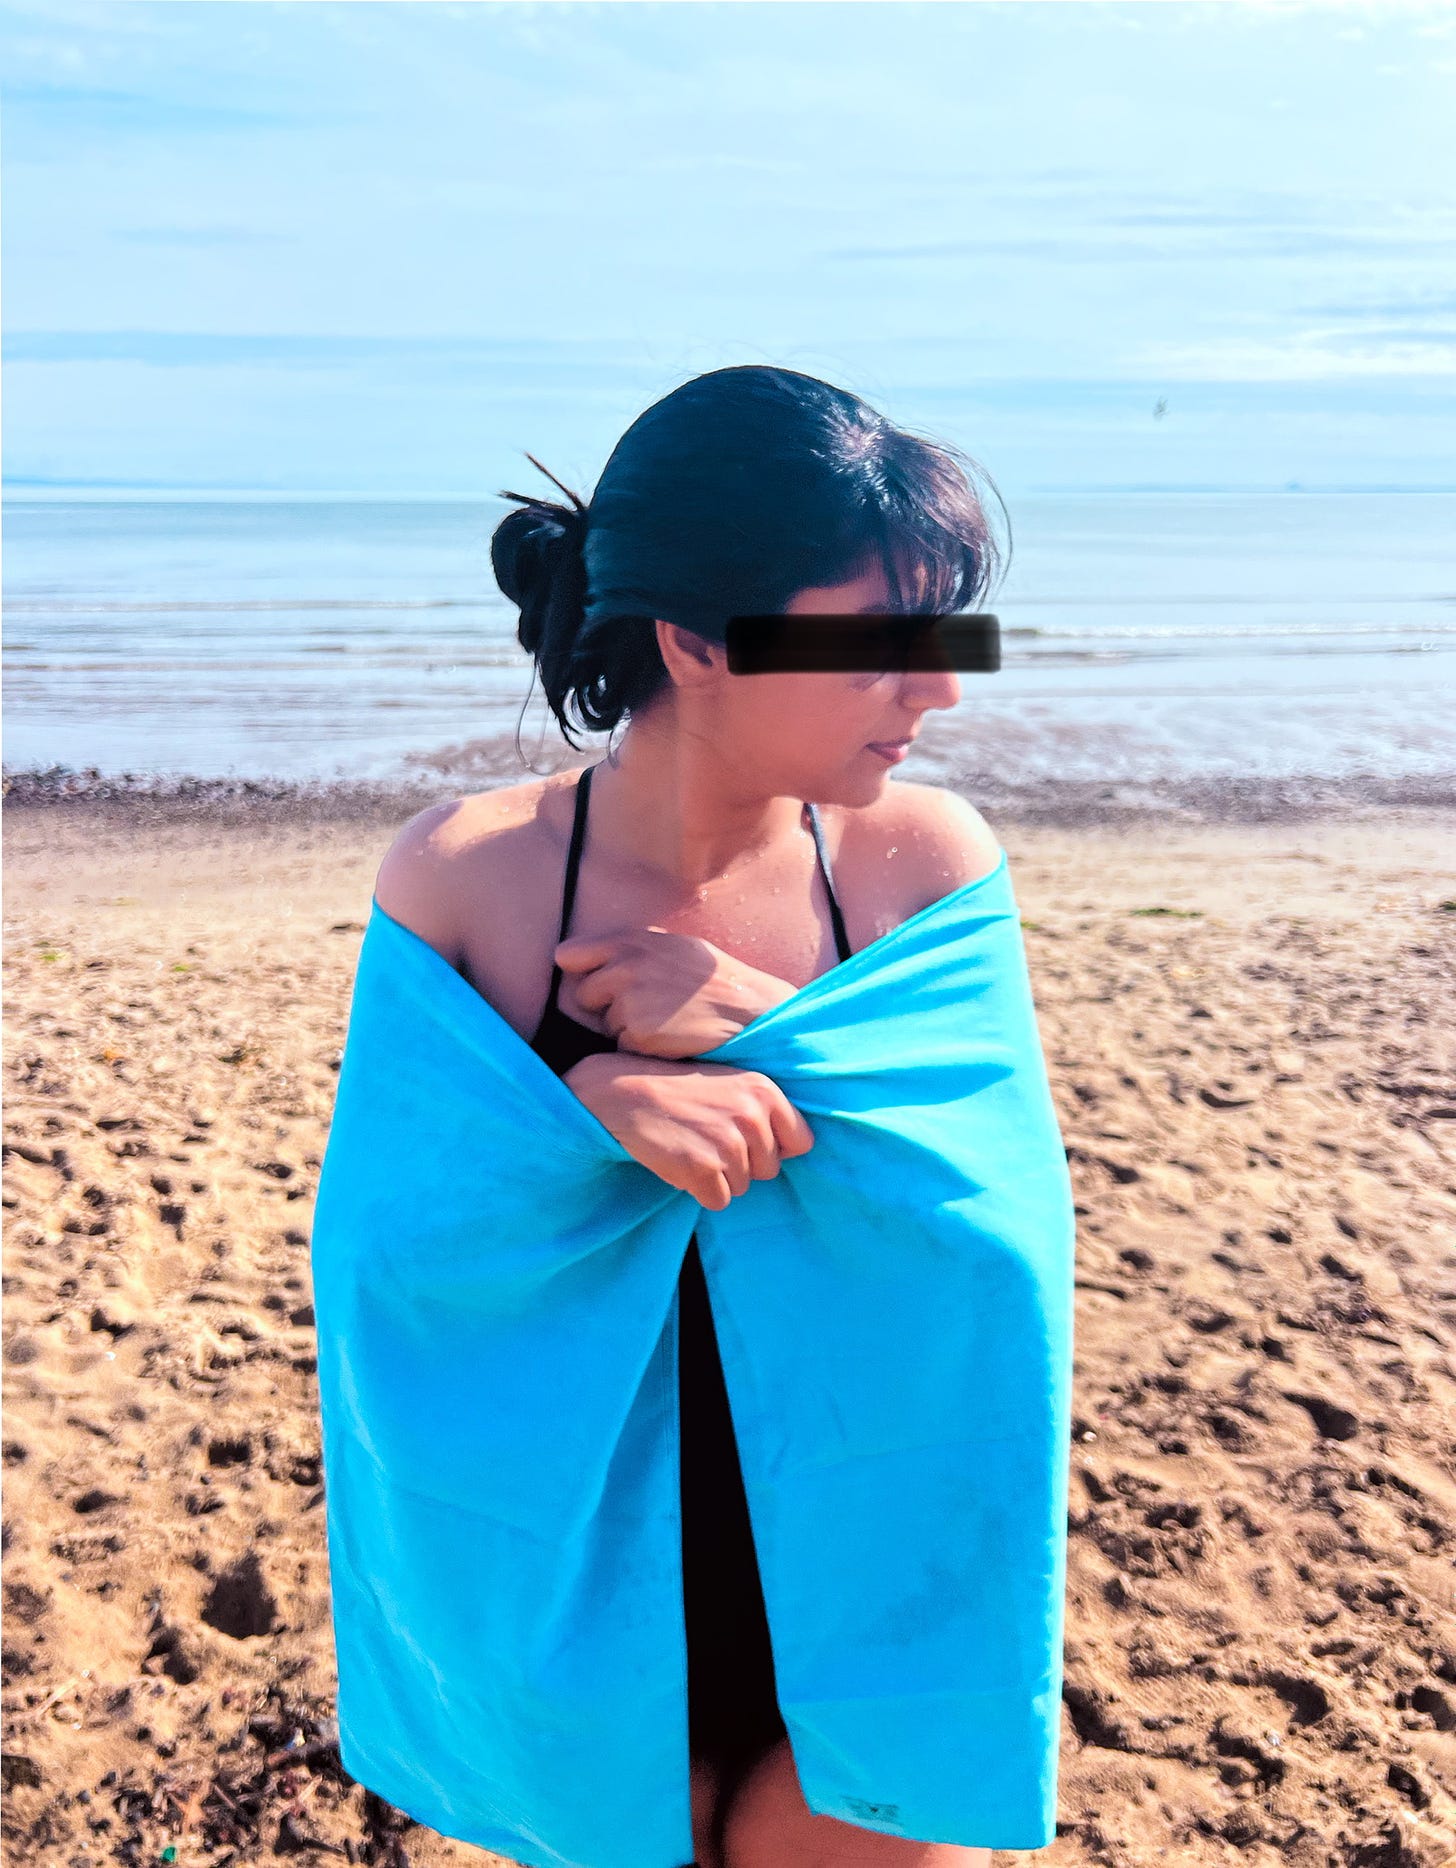 A woman stands on a beach. She is wrapping a blue towel around herself. Behind the towel is a black swimsuit. Her hair is dark and tied up. She has water droplets on her skin. The day is bright and warm looking. A black streak is drawn across her face, redacting her eyes.